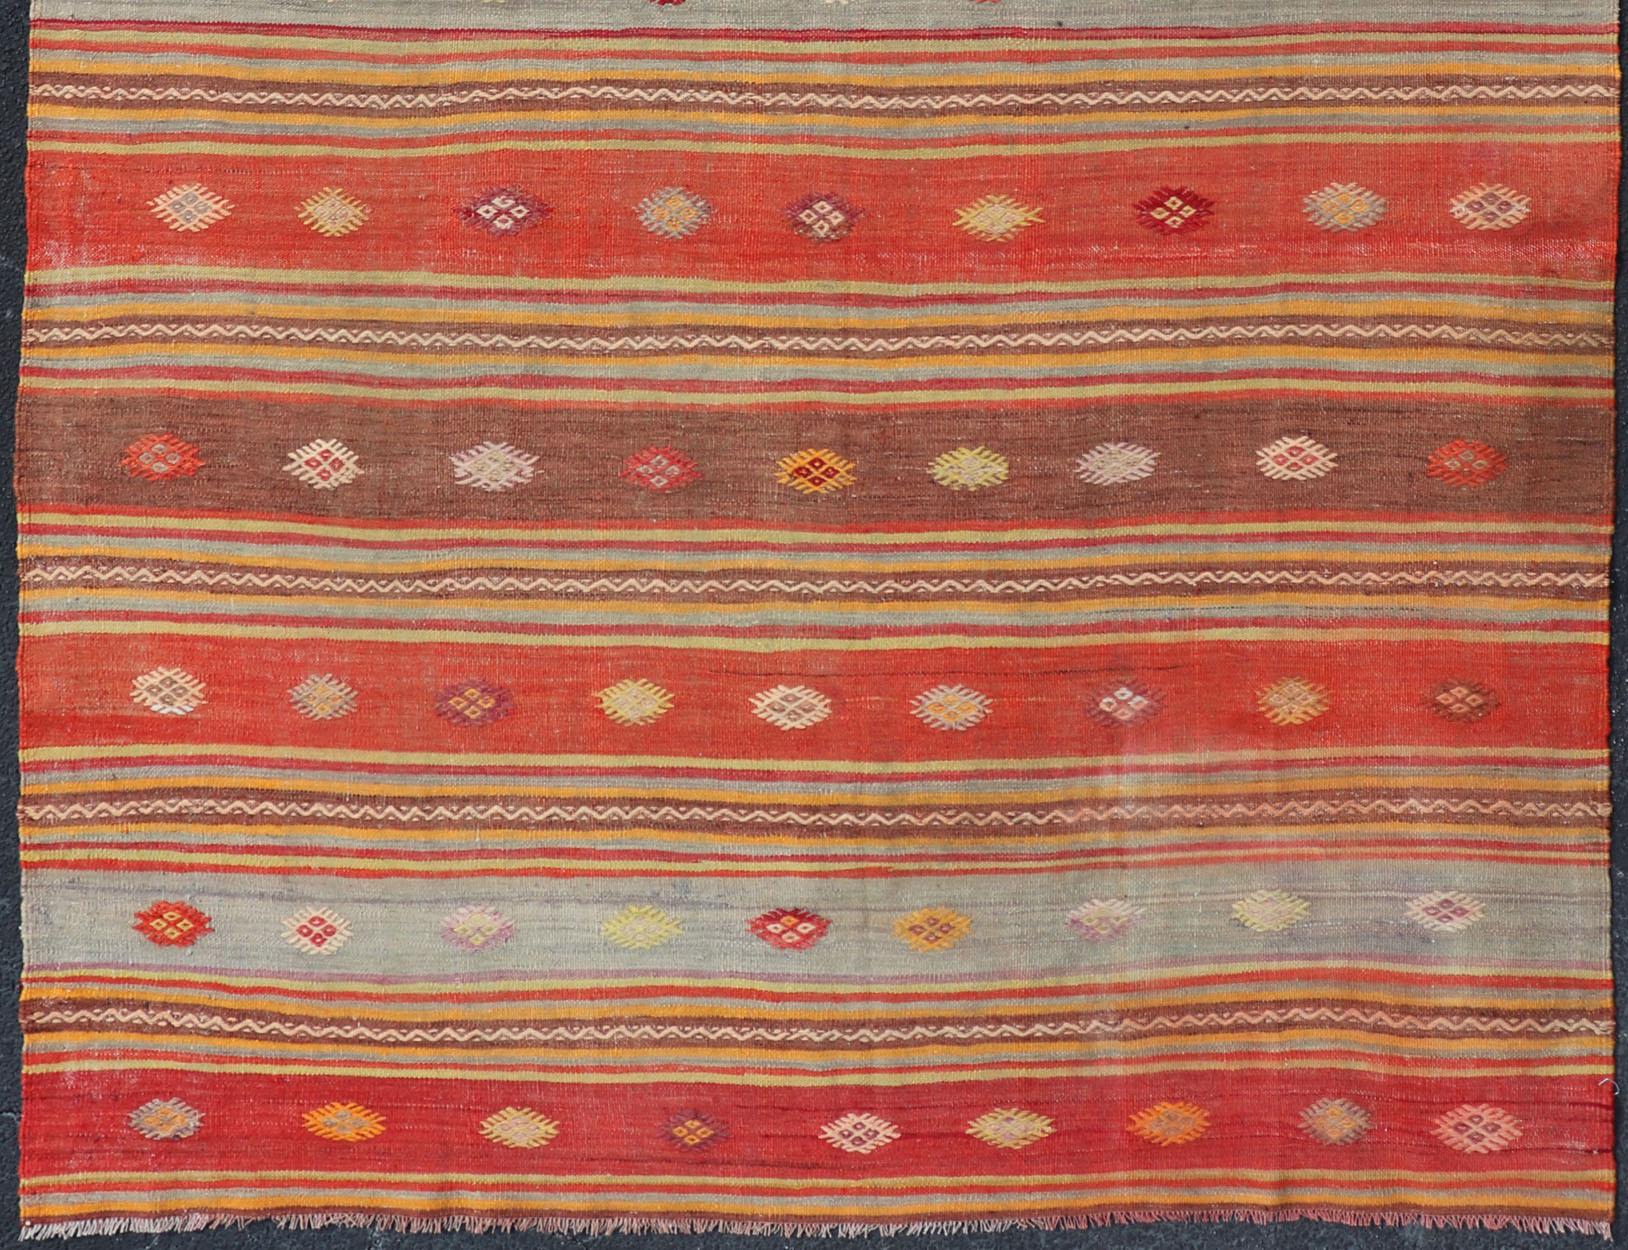 Colorful Vintage Turkish Embroidered Kilim with Stripes and Geometric Motifs In Good Condition For Sale In Atlanta, GA